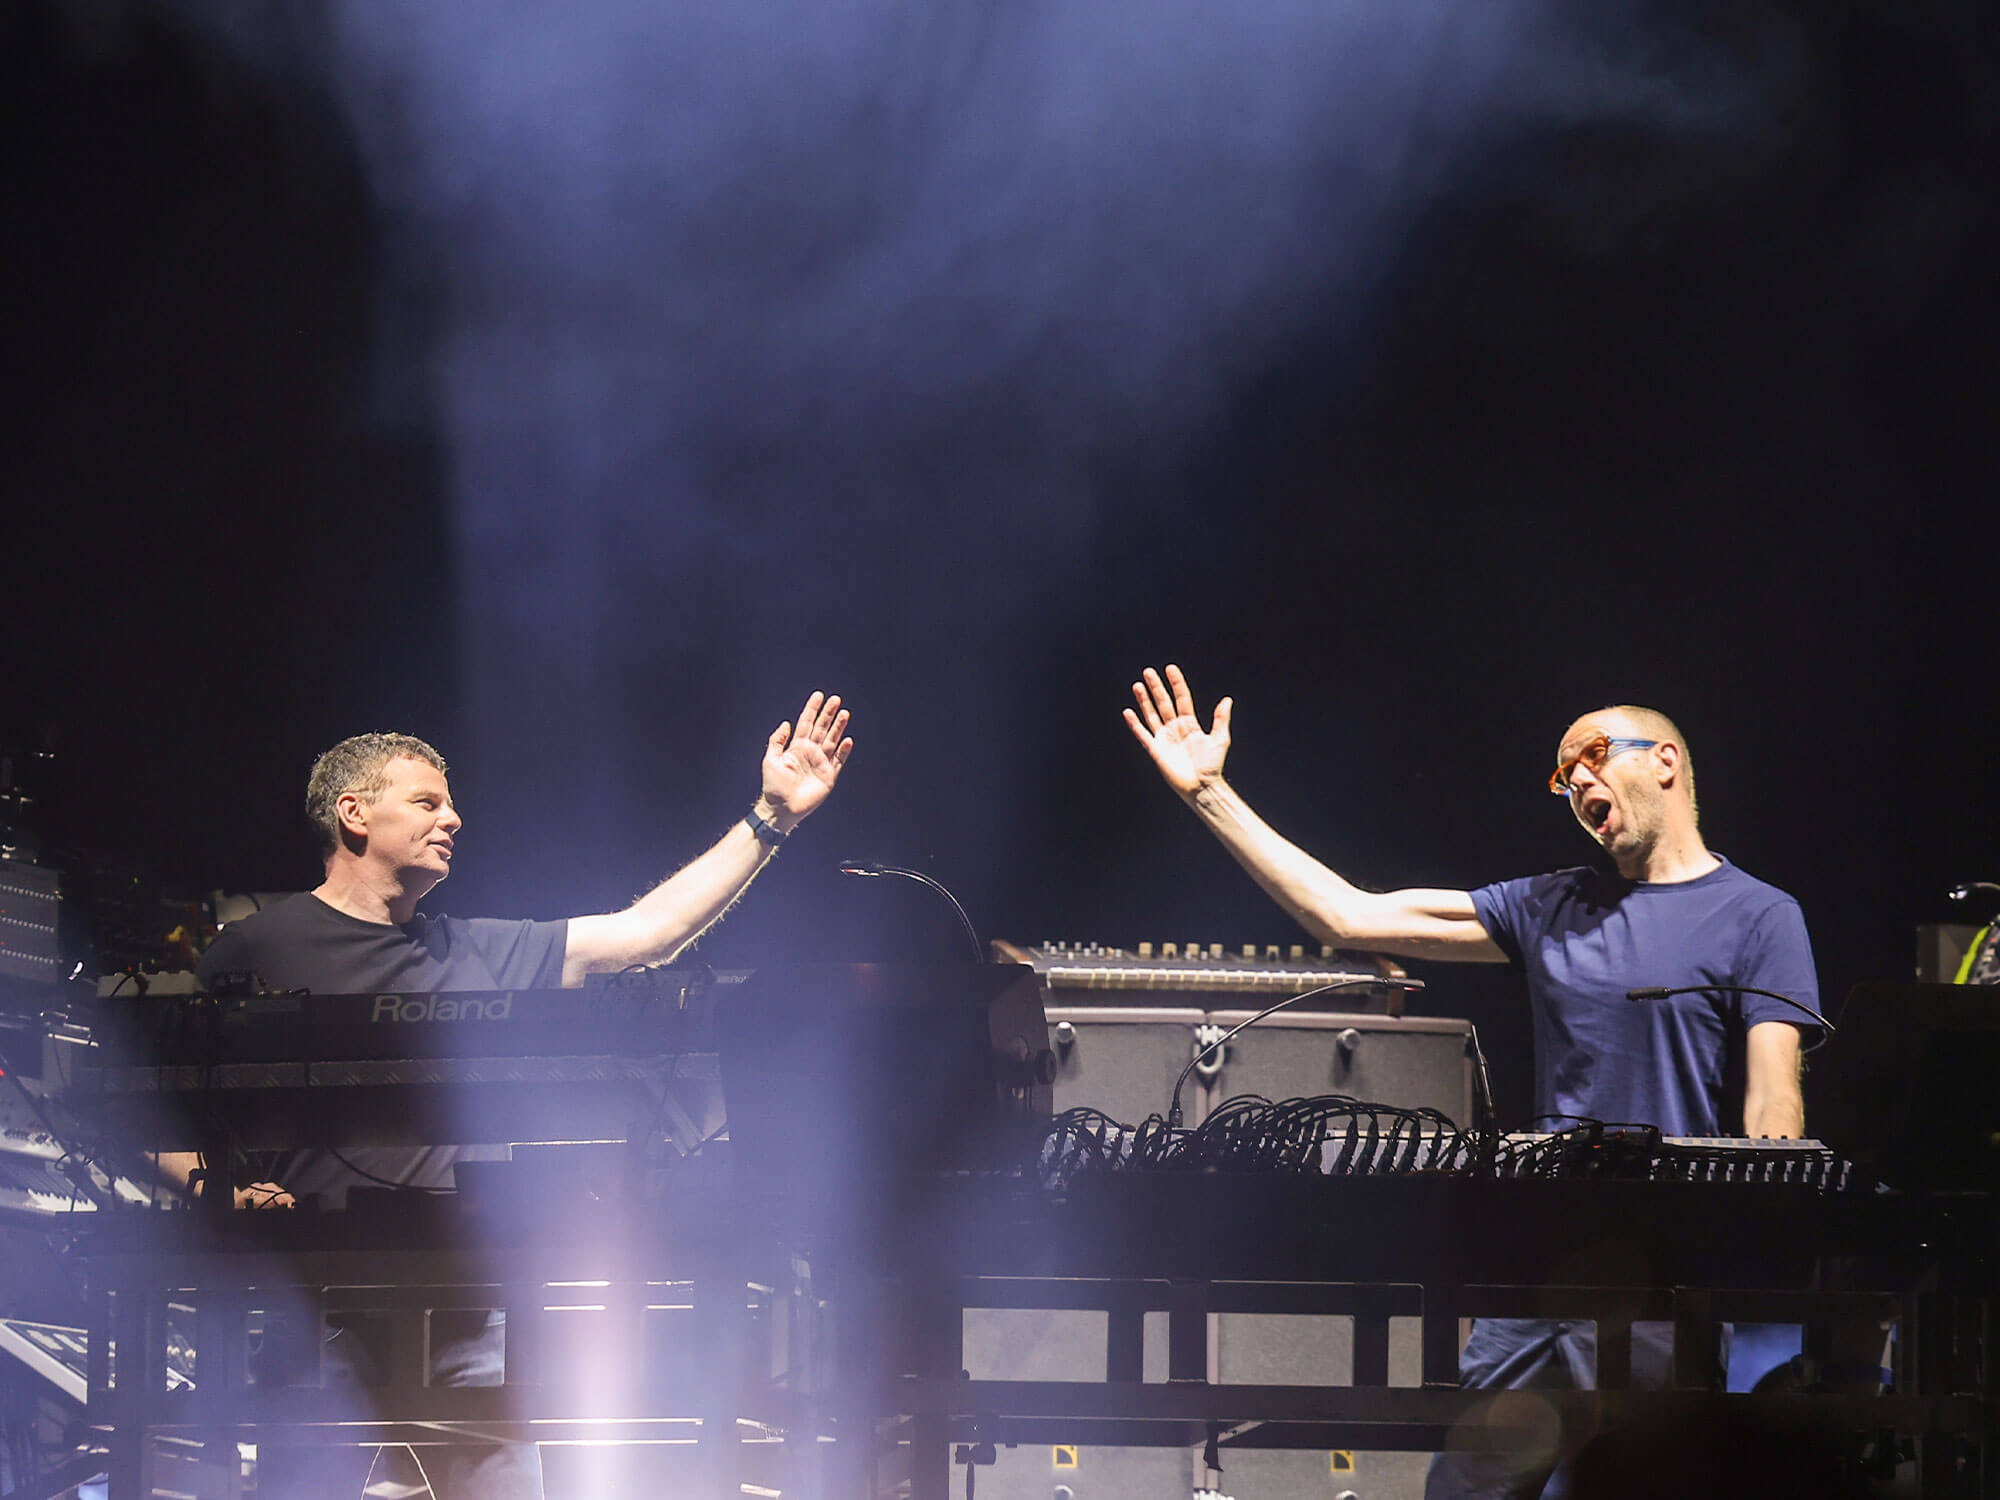 Chemical Brothers still on explosive form with their tenth studio album